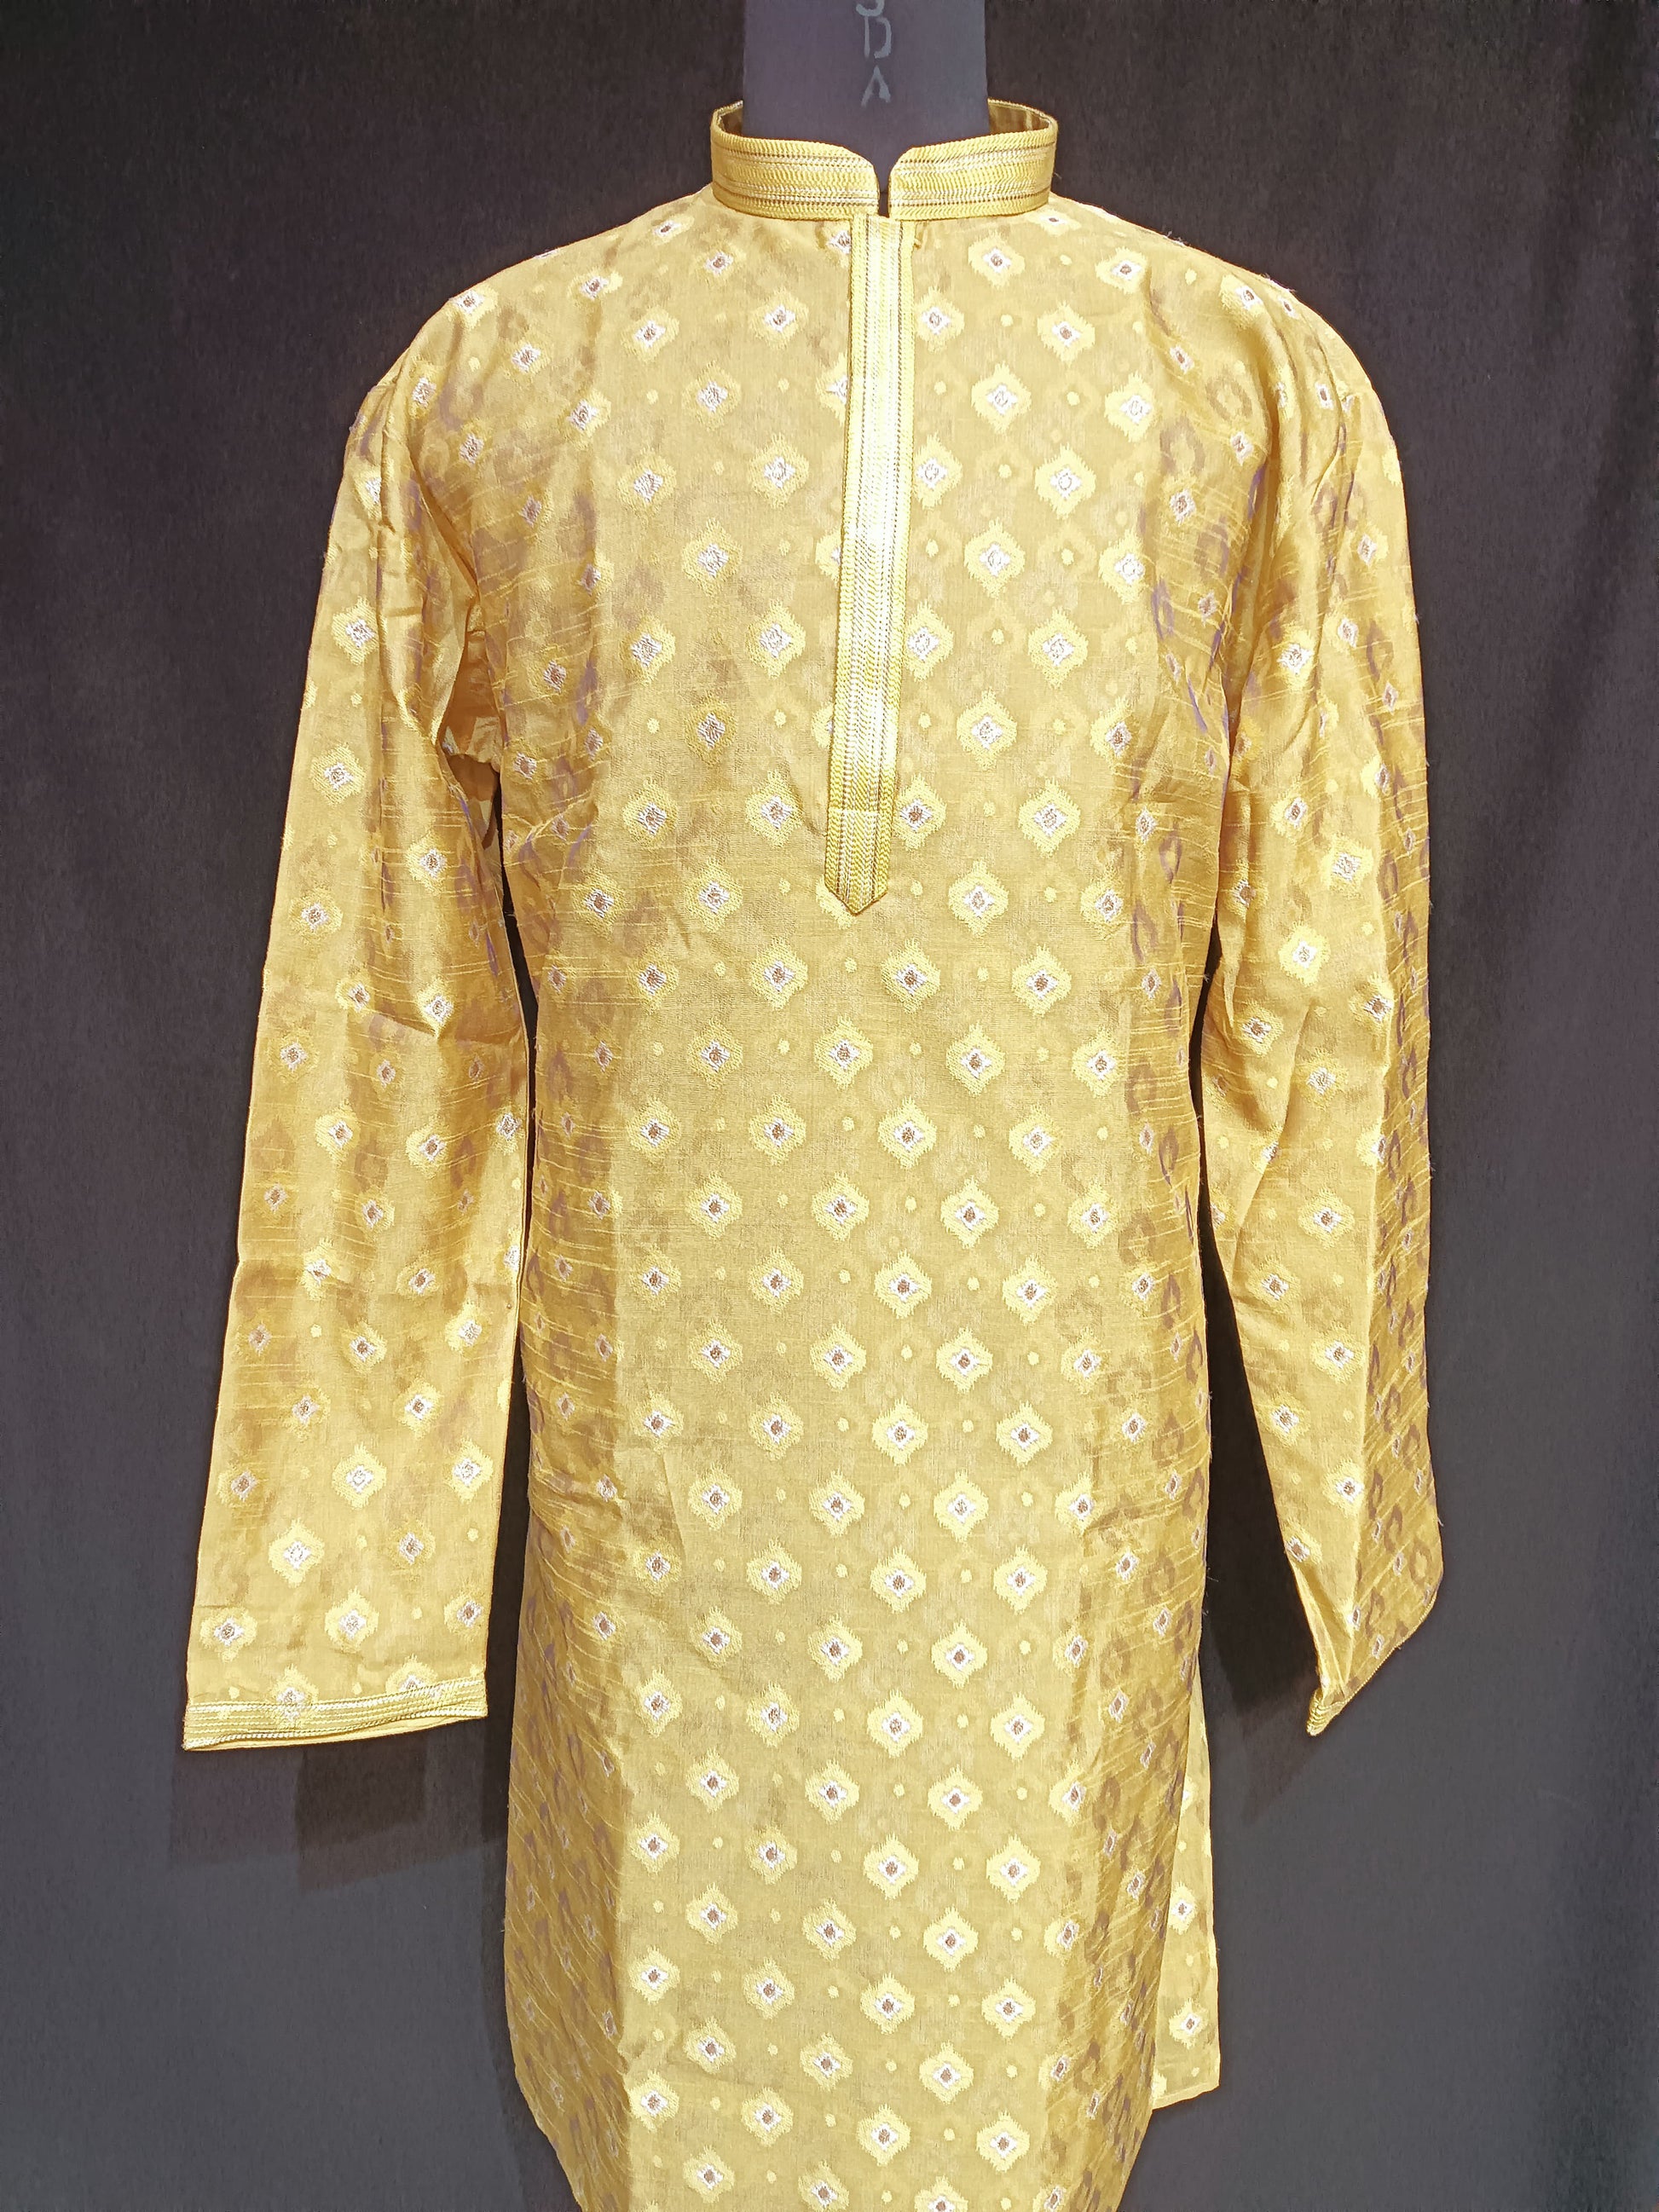 Attractive Yellow Colored Thread Work Kurta And Pajama Pant For Men